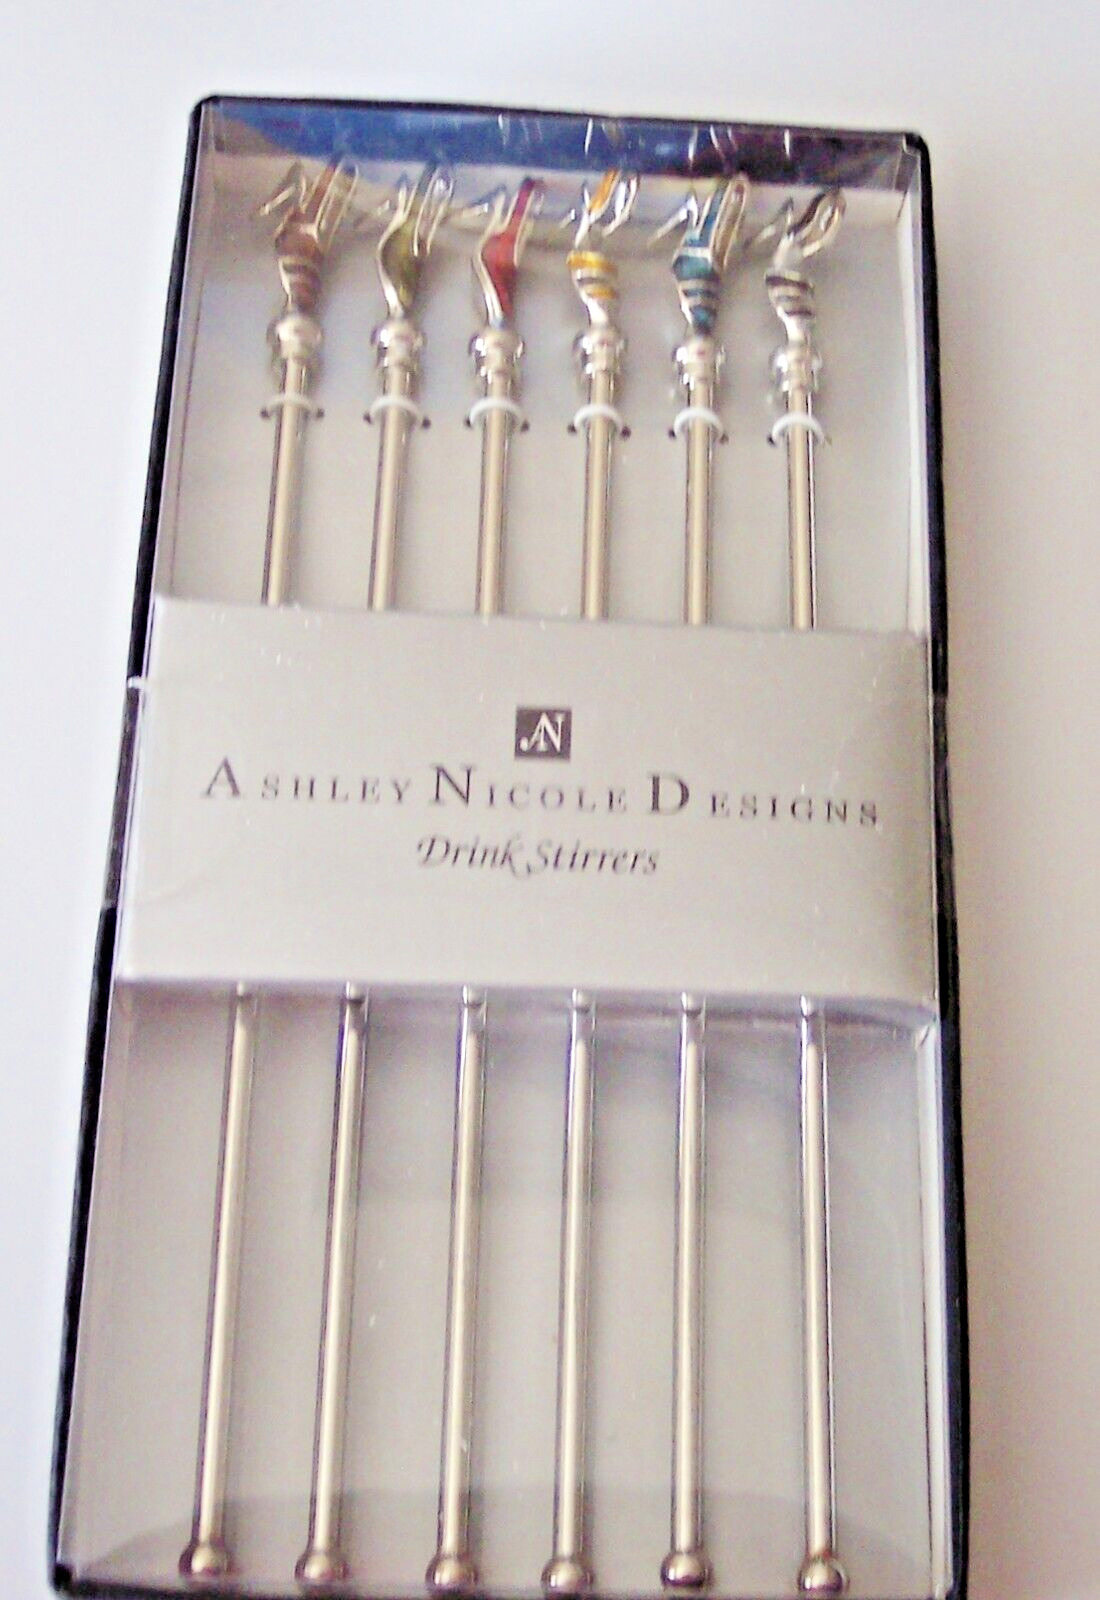 Drink Stirrers With Enameled High Healed Shoes Tops By Ashley Nicole Designs